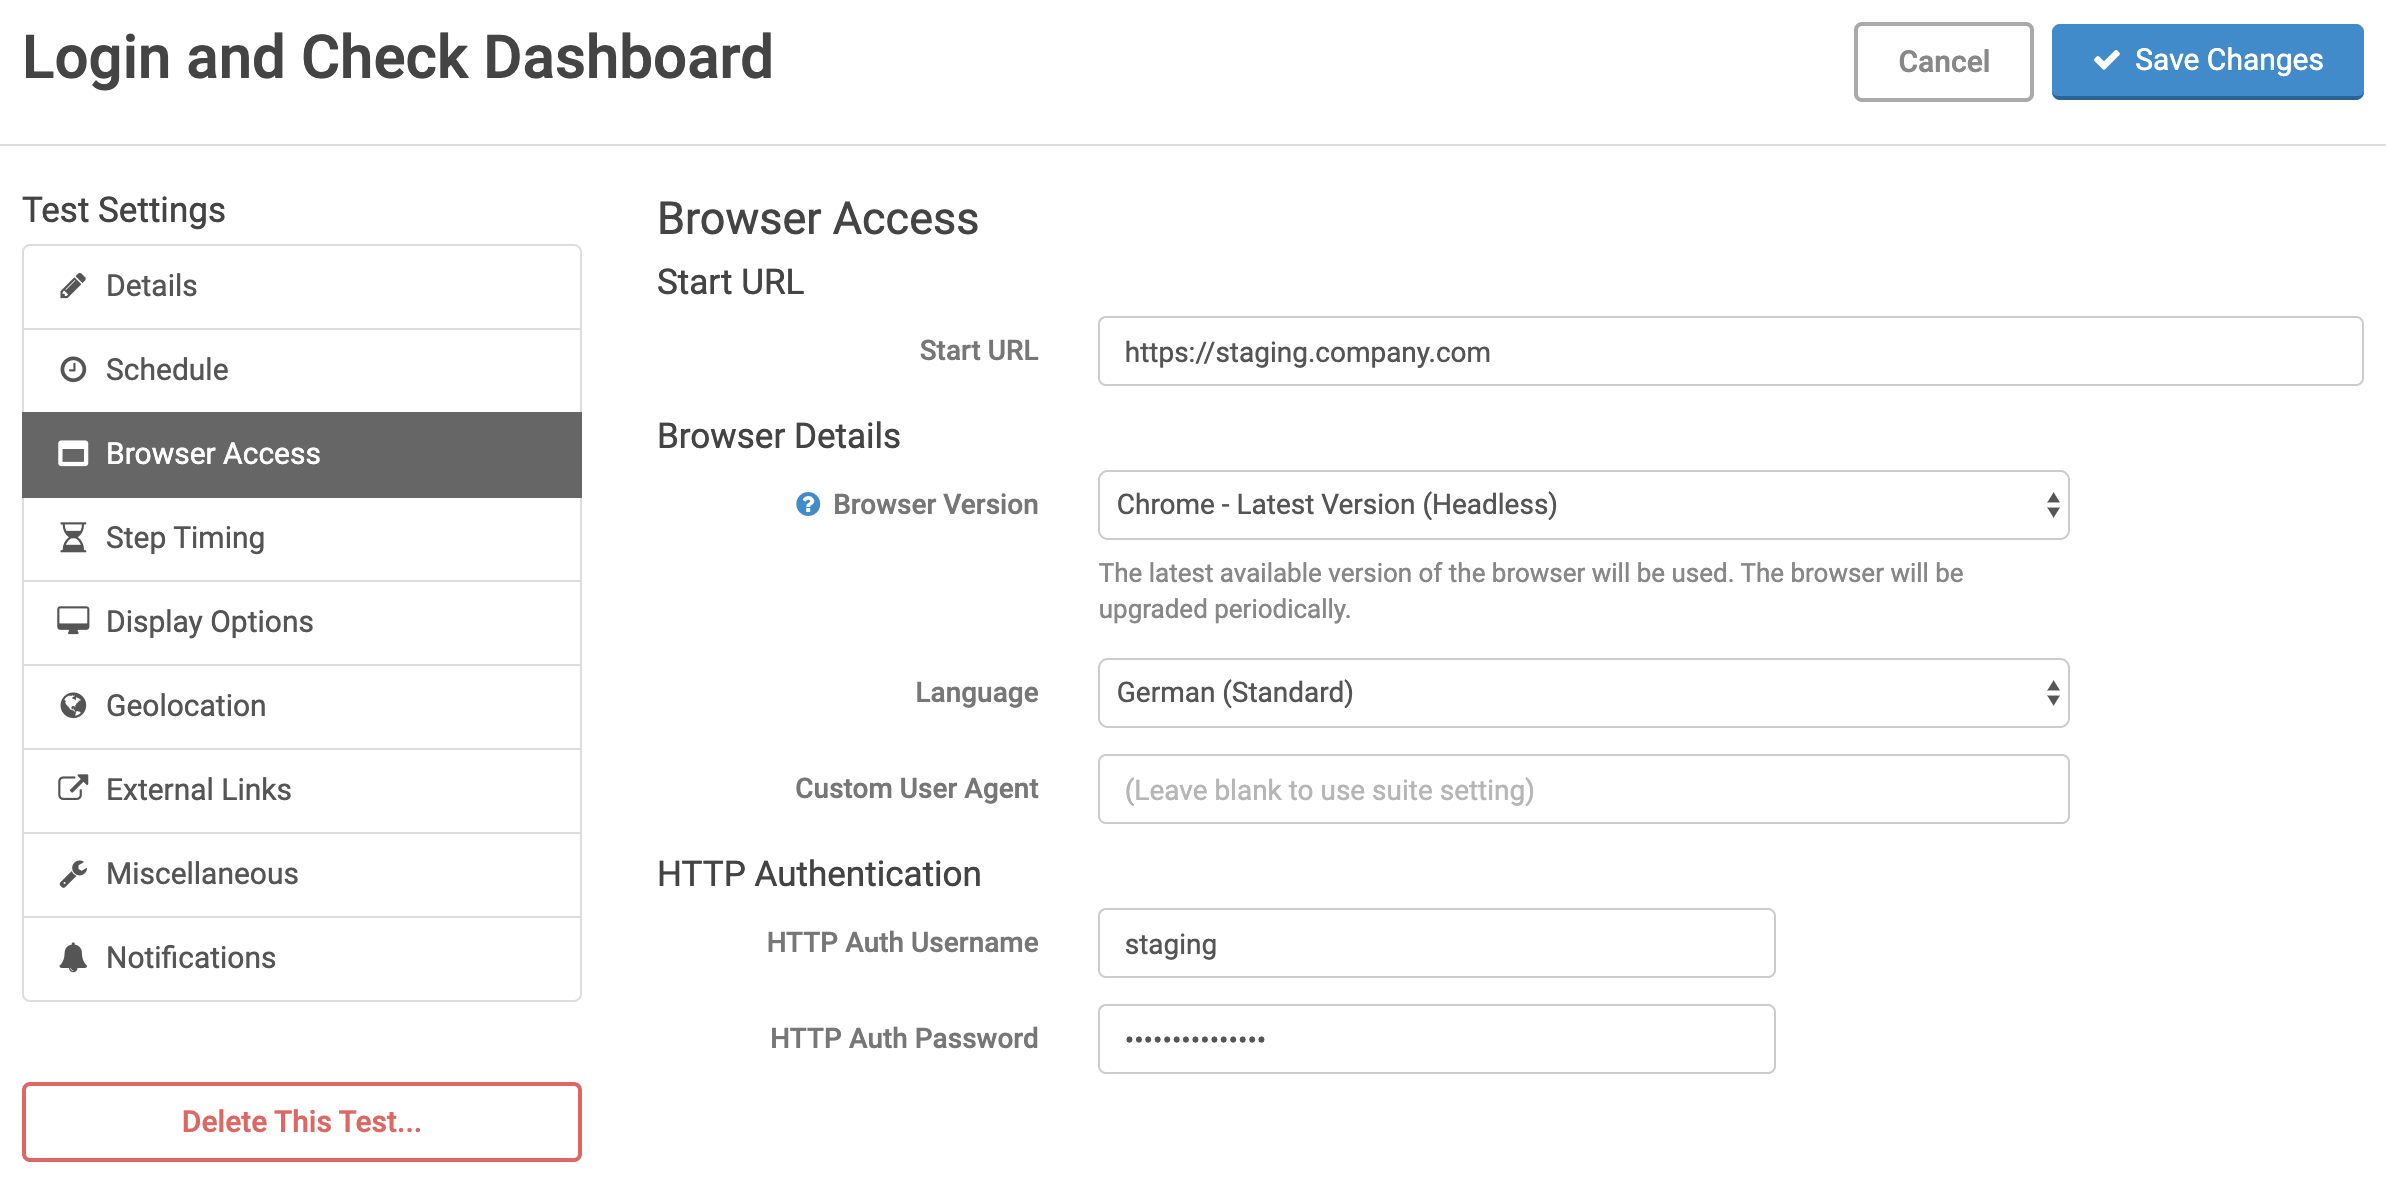 Browser Access